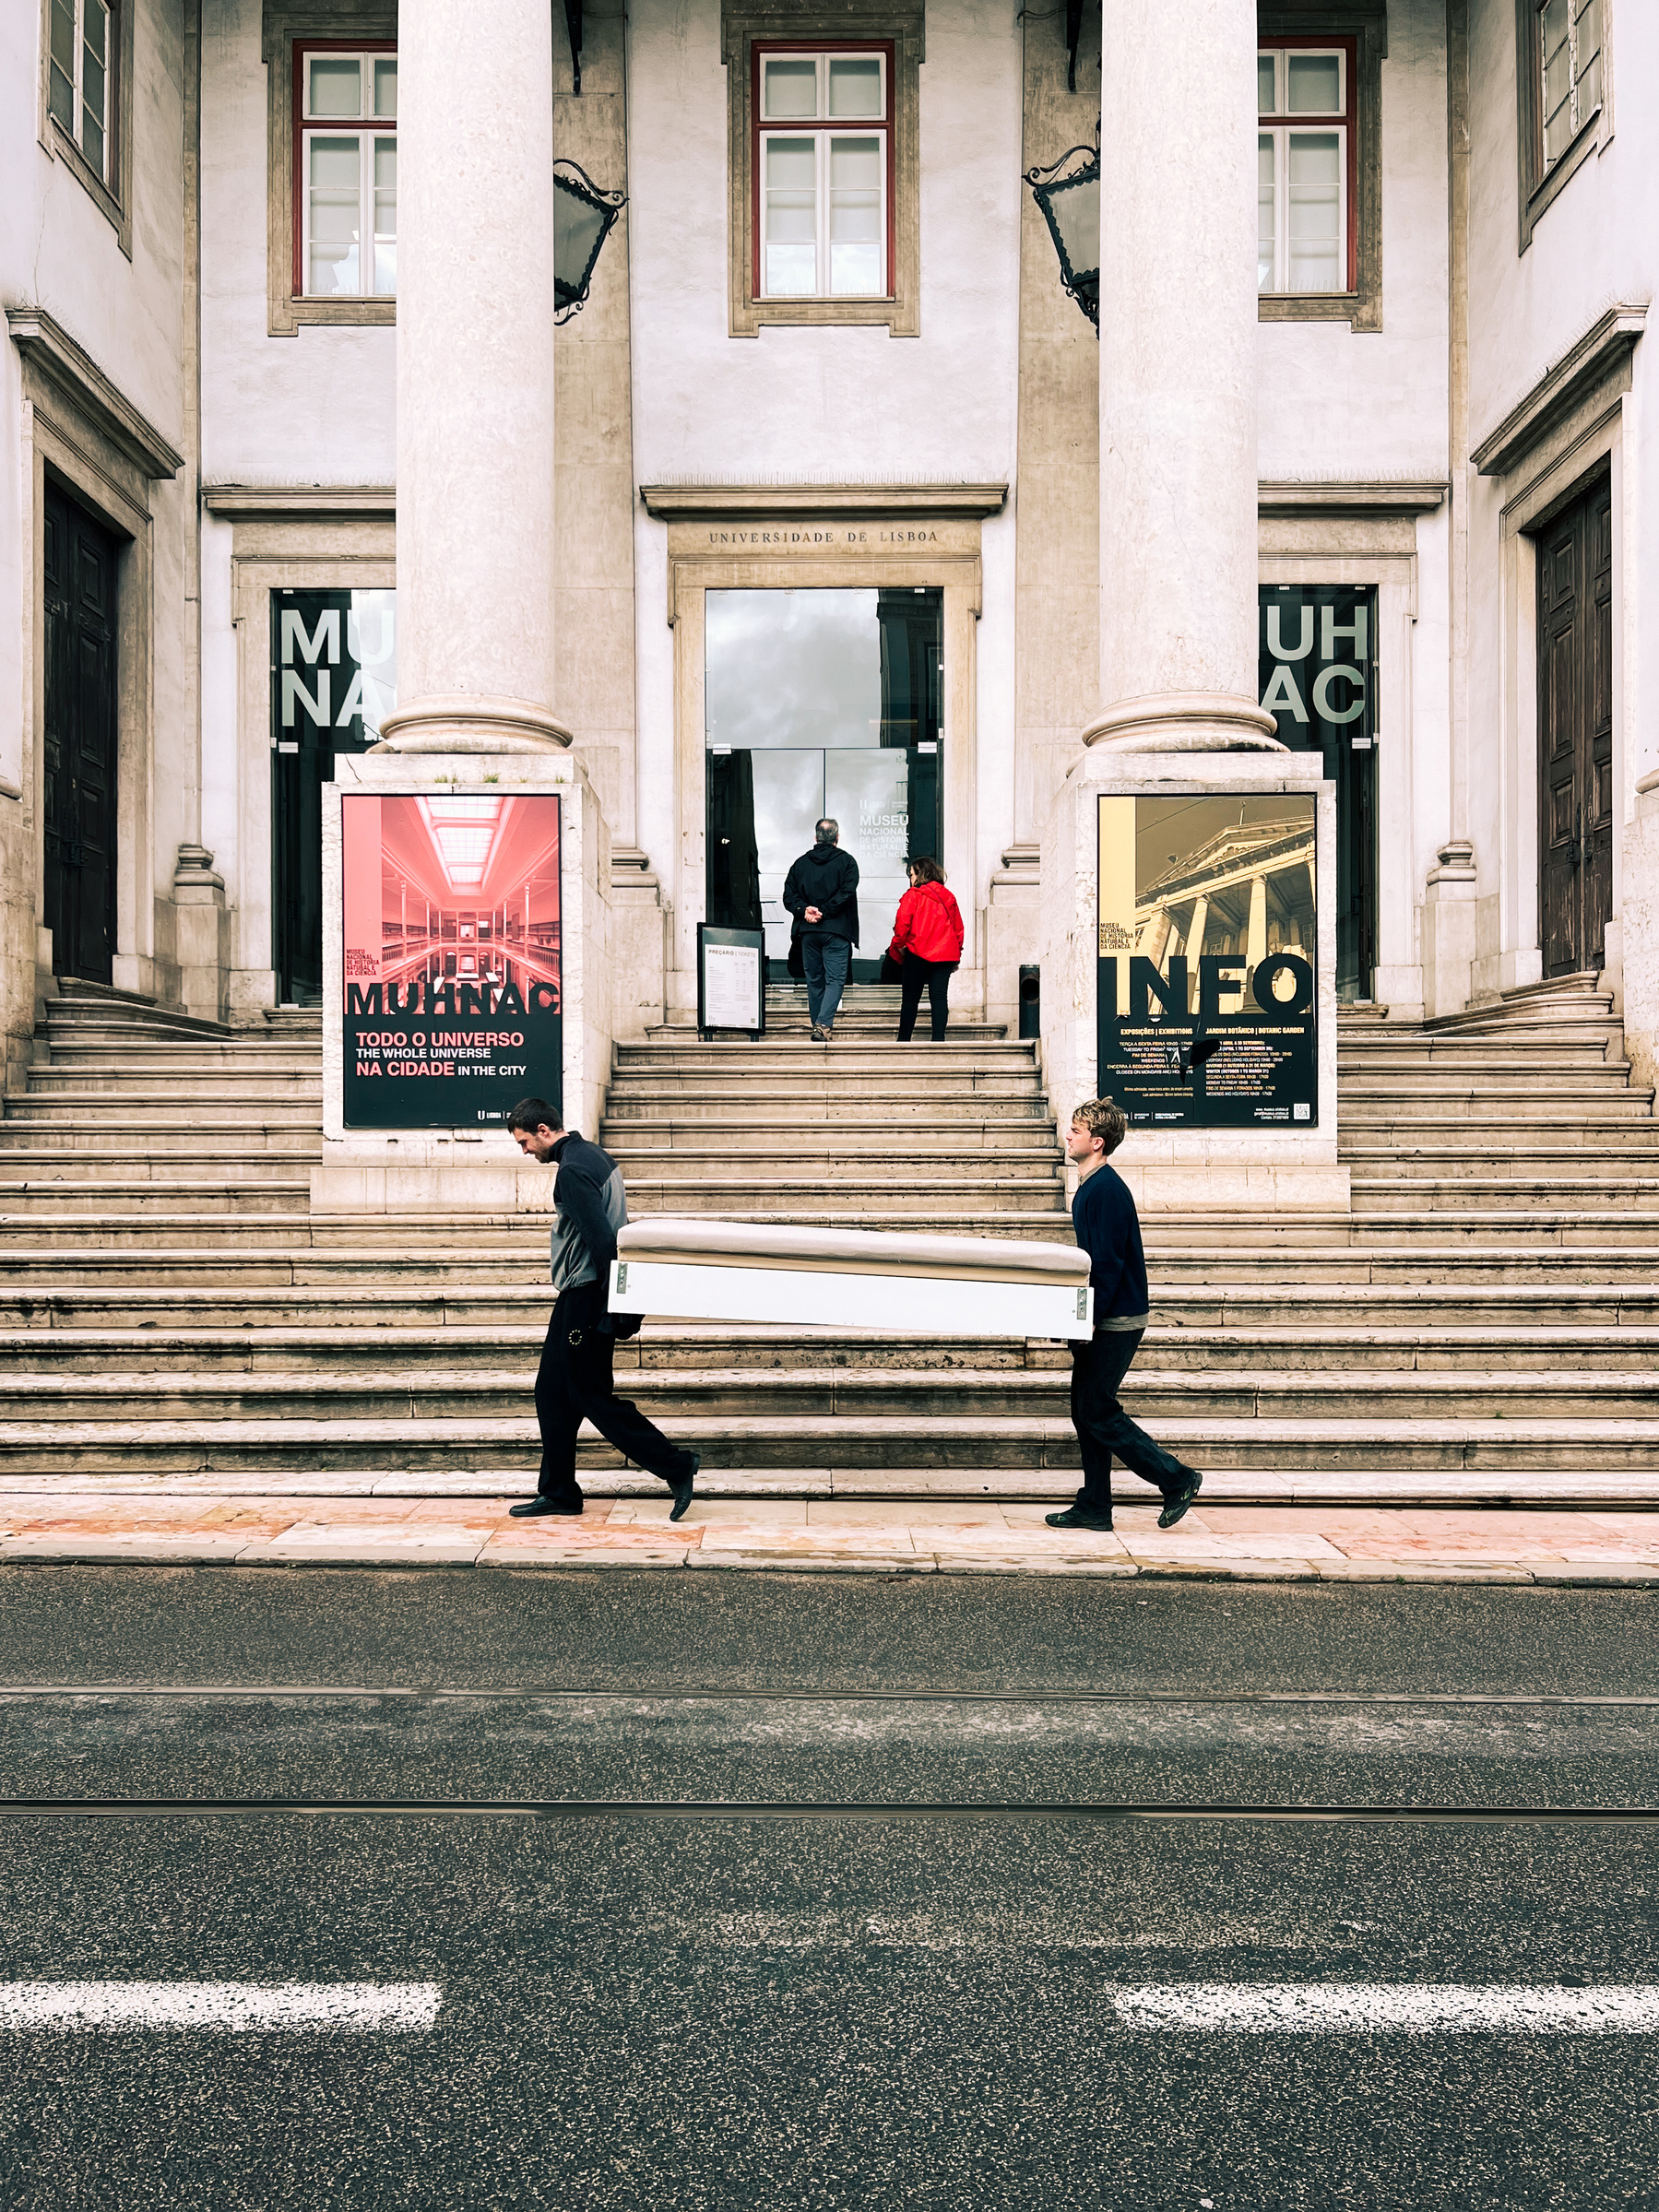 Two individuals carrying a long object on a city street in front of a building with steps and columns, a museum or university entrance, with posters on either side of the doorway.